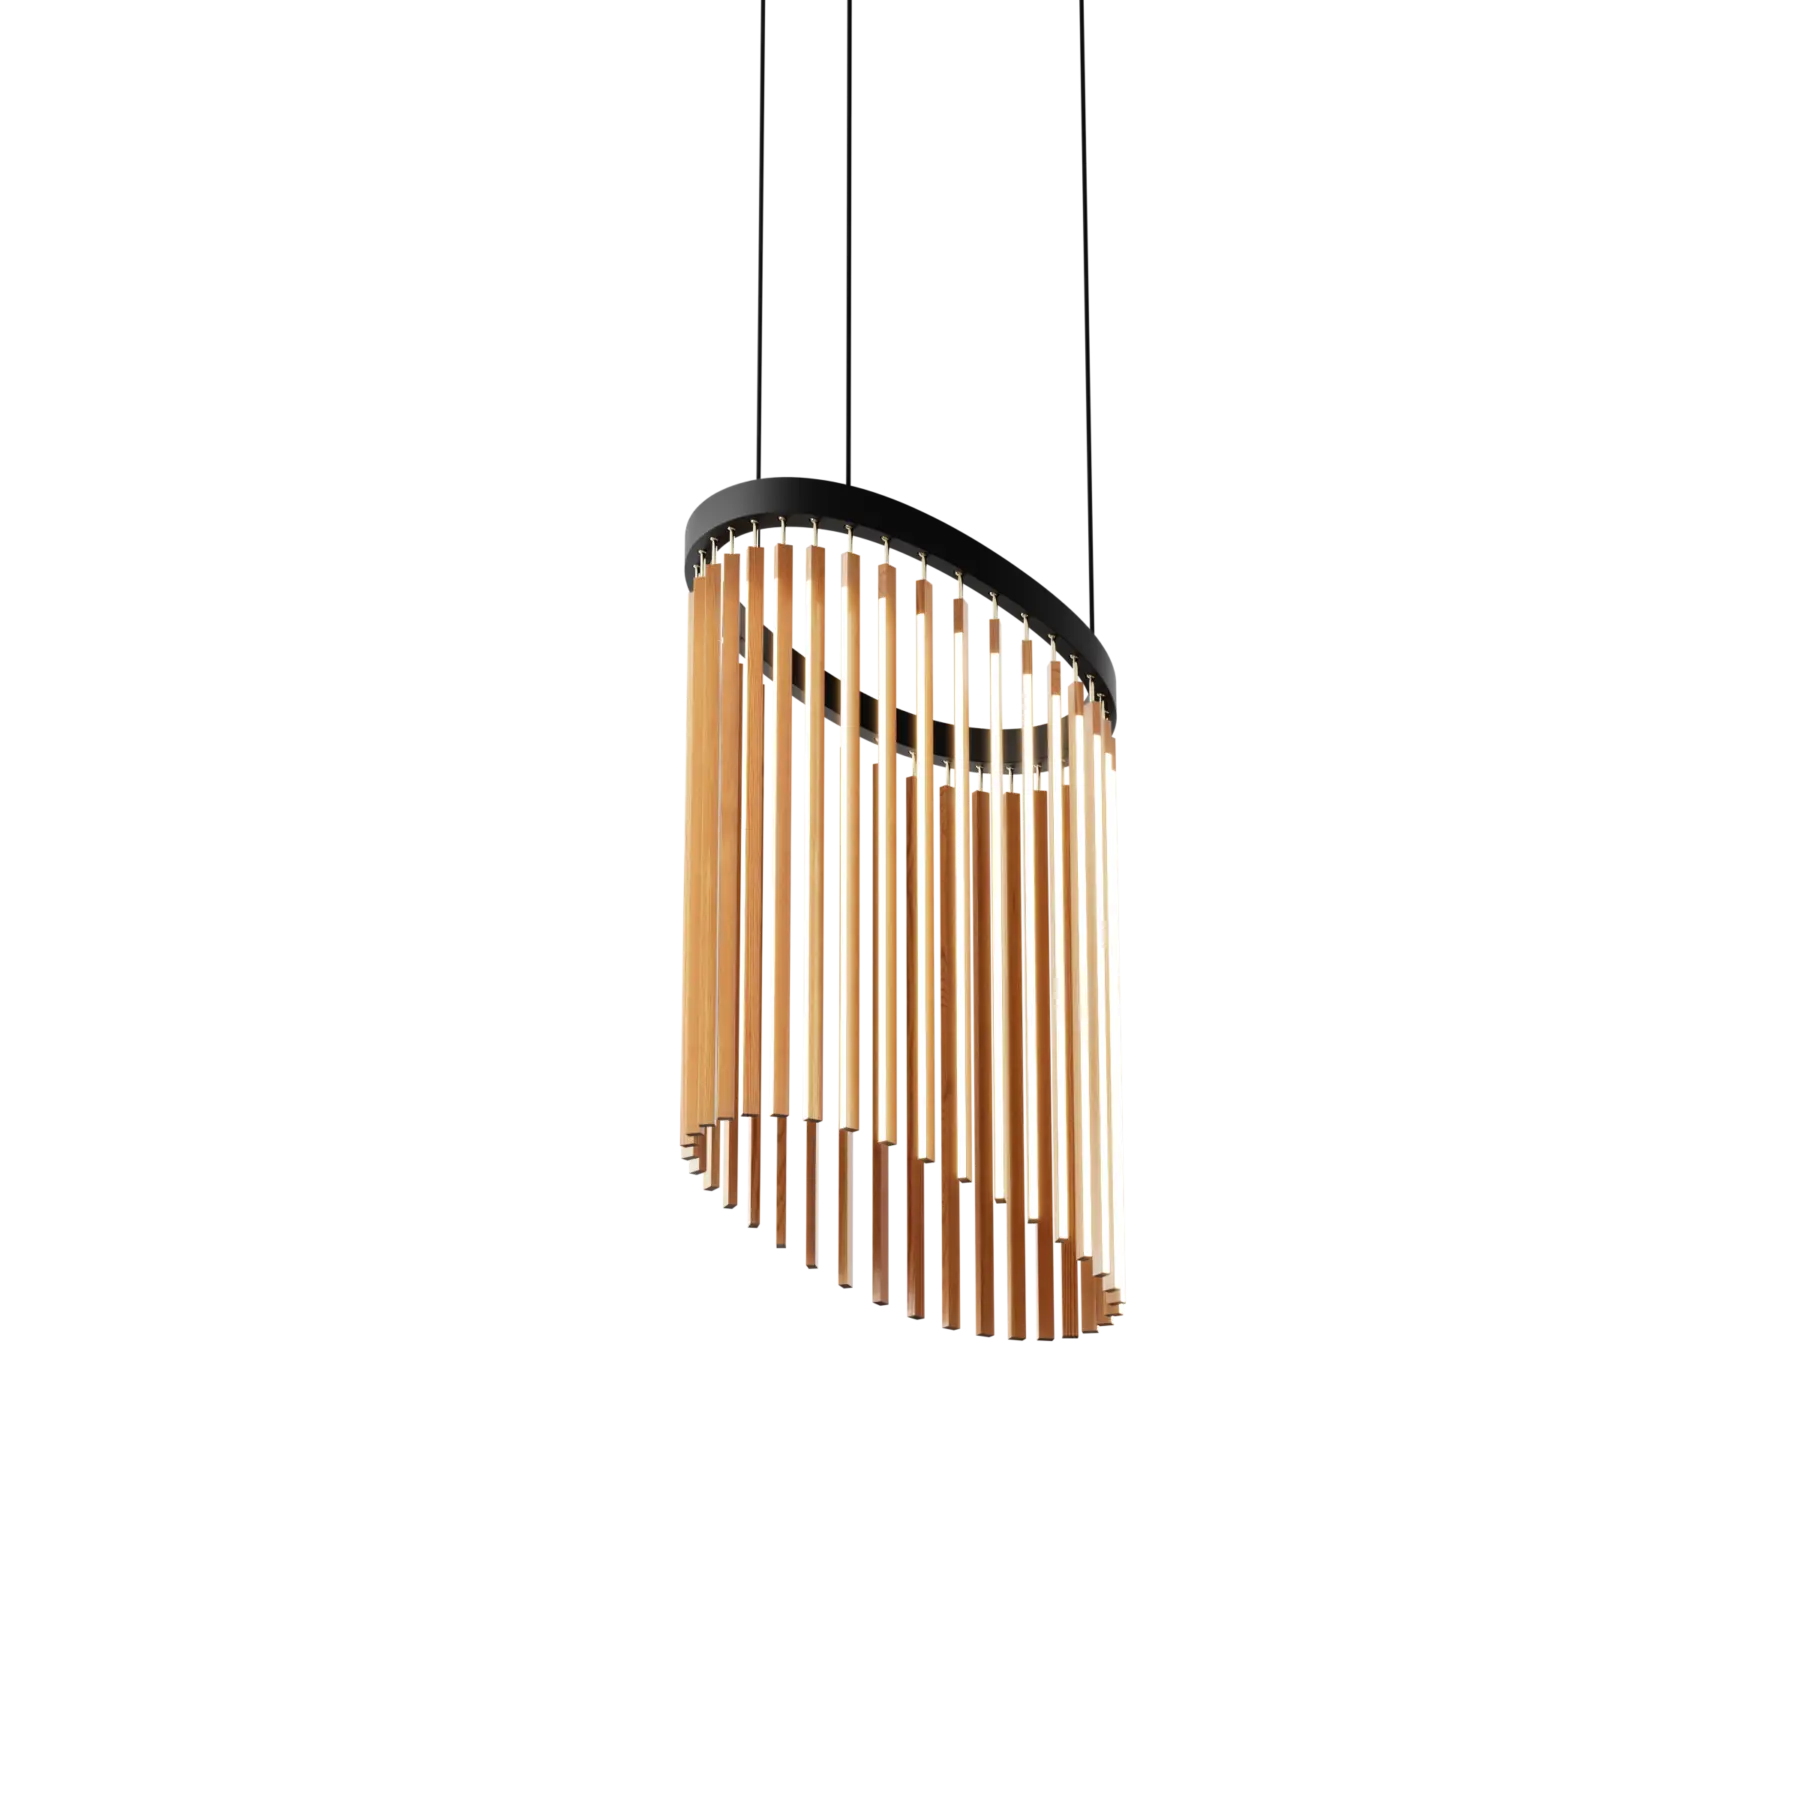 Image of a Stickbulb Chime lighting fixture. The modern fixture consists of sleek wooden beams with multiple integrated LED bulbs.